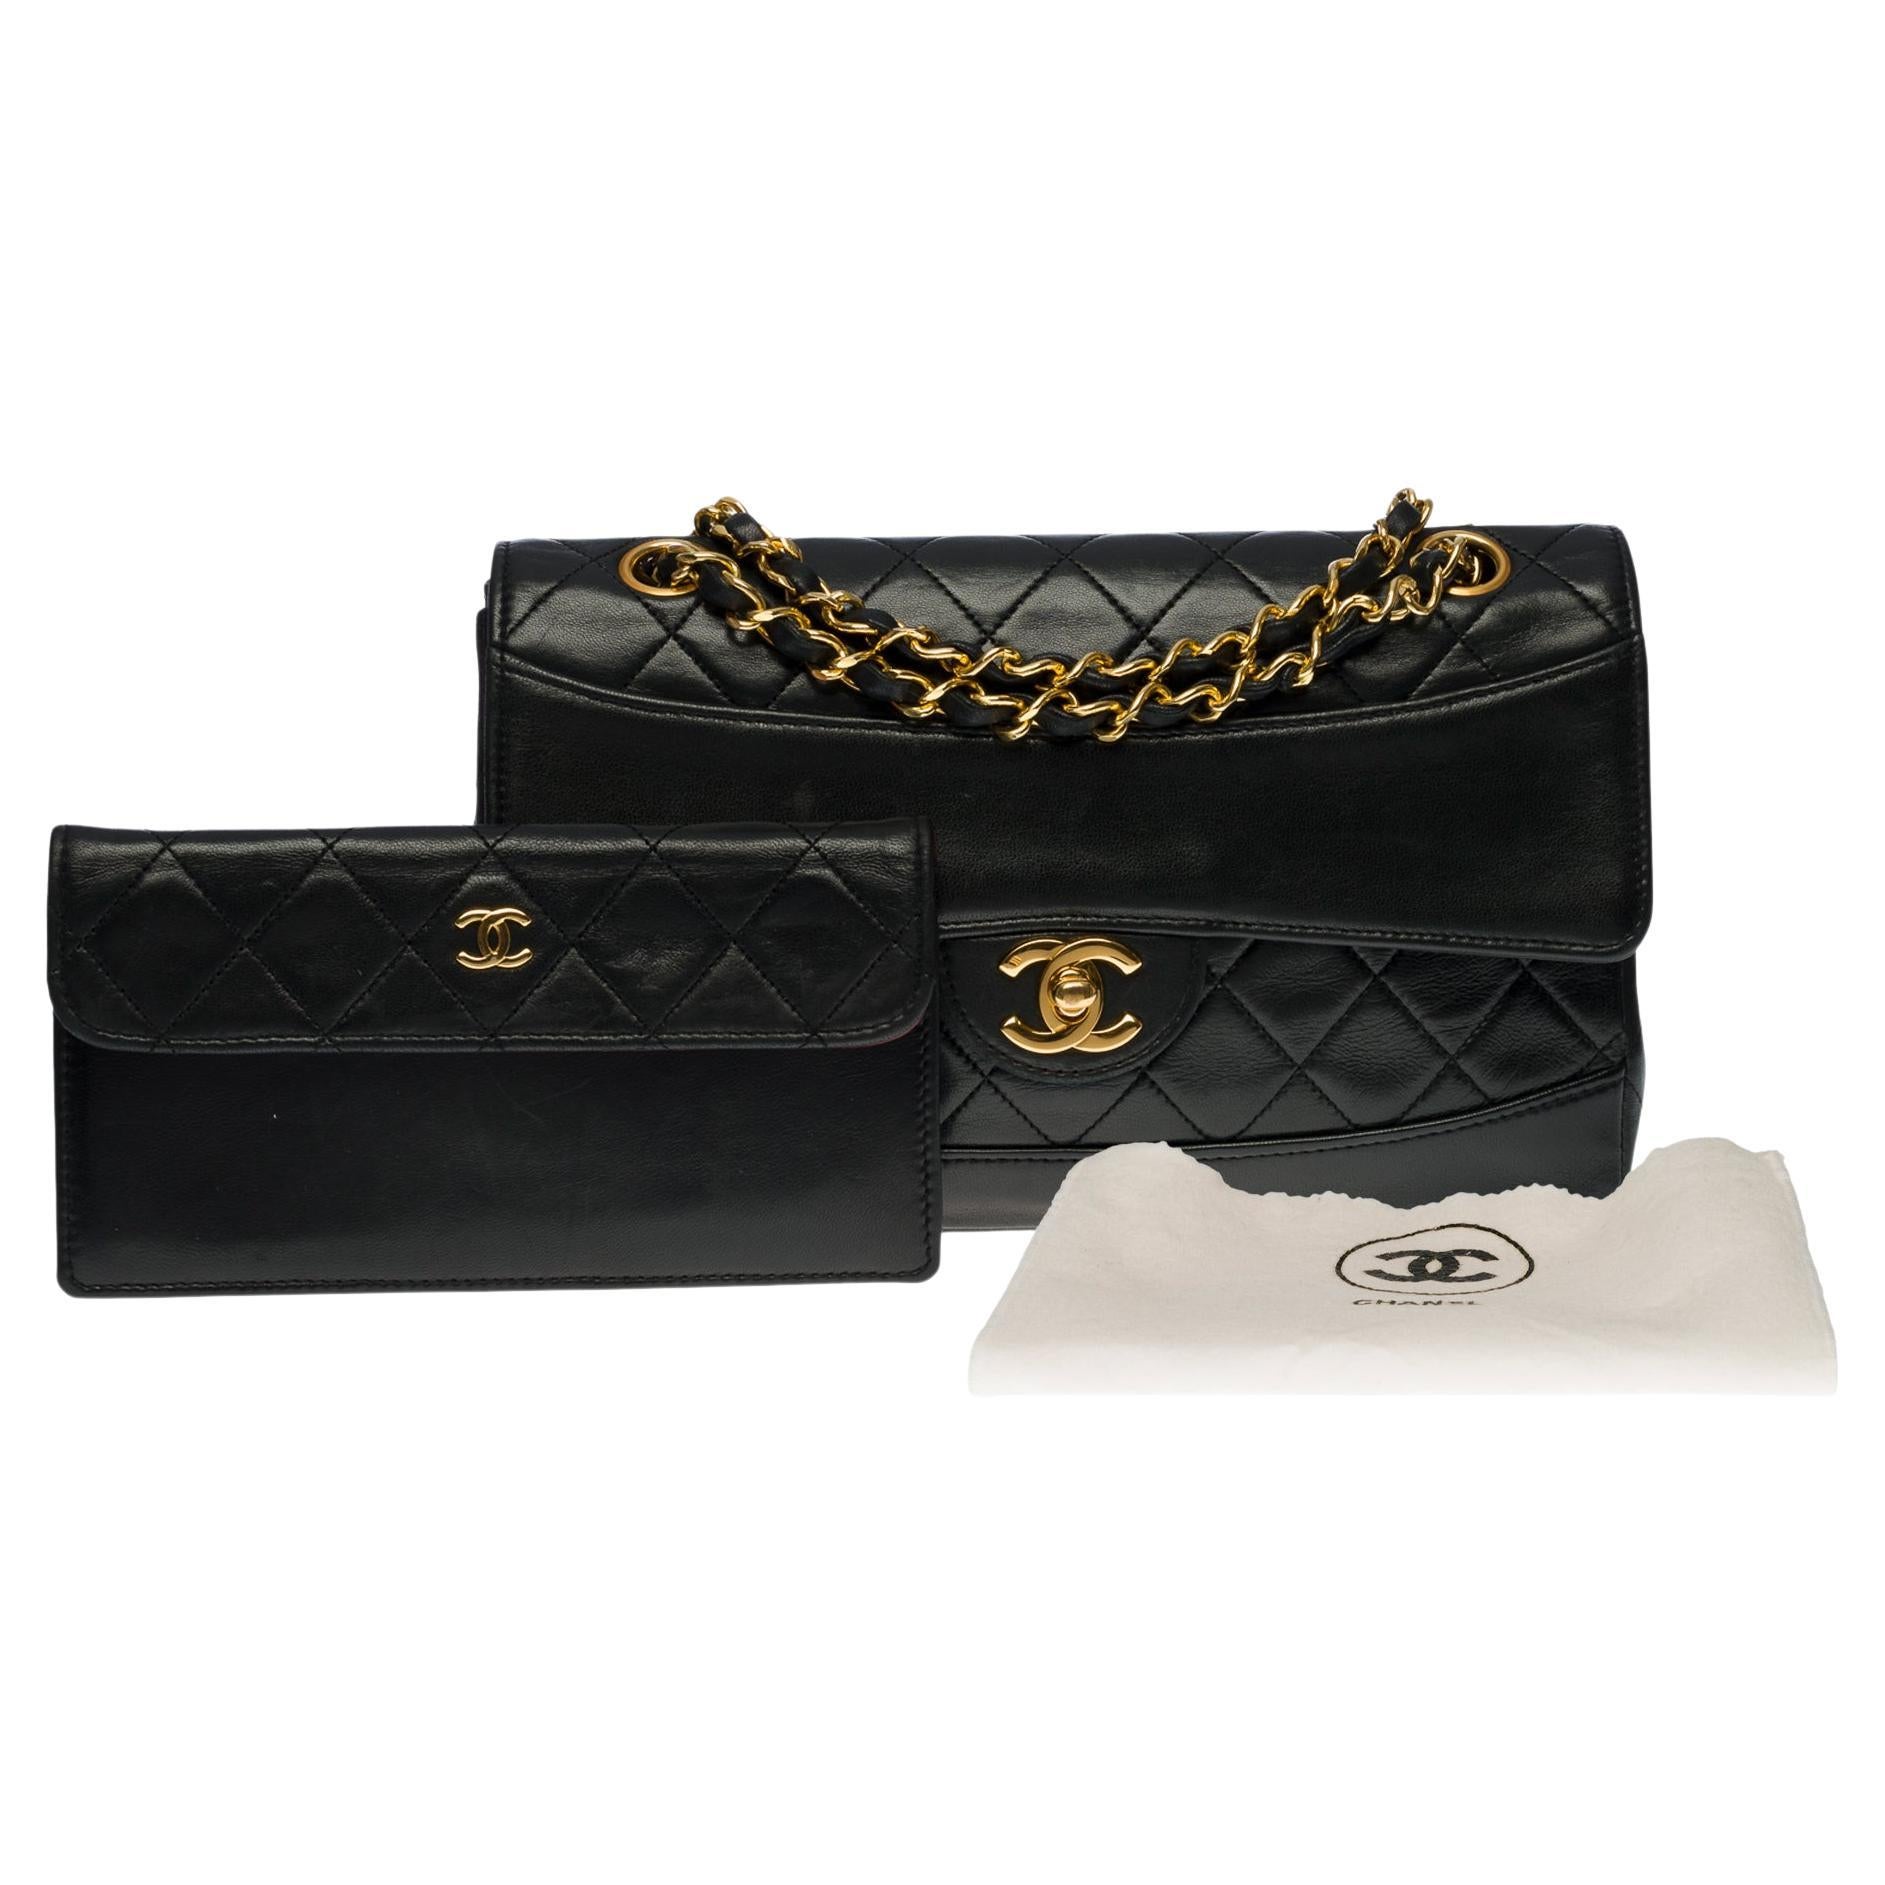 Rare Chanel Classic Flap shoulder bag in black quilted lambskin with Pouch, GHW